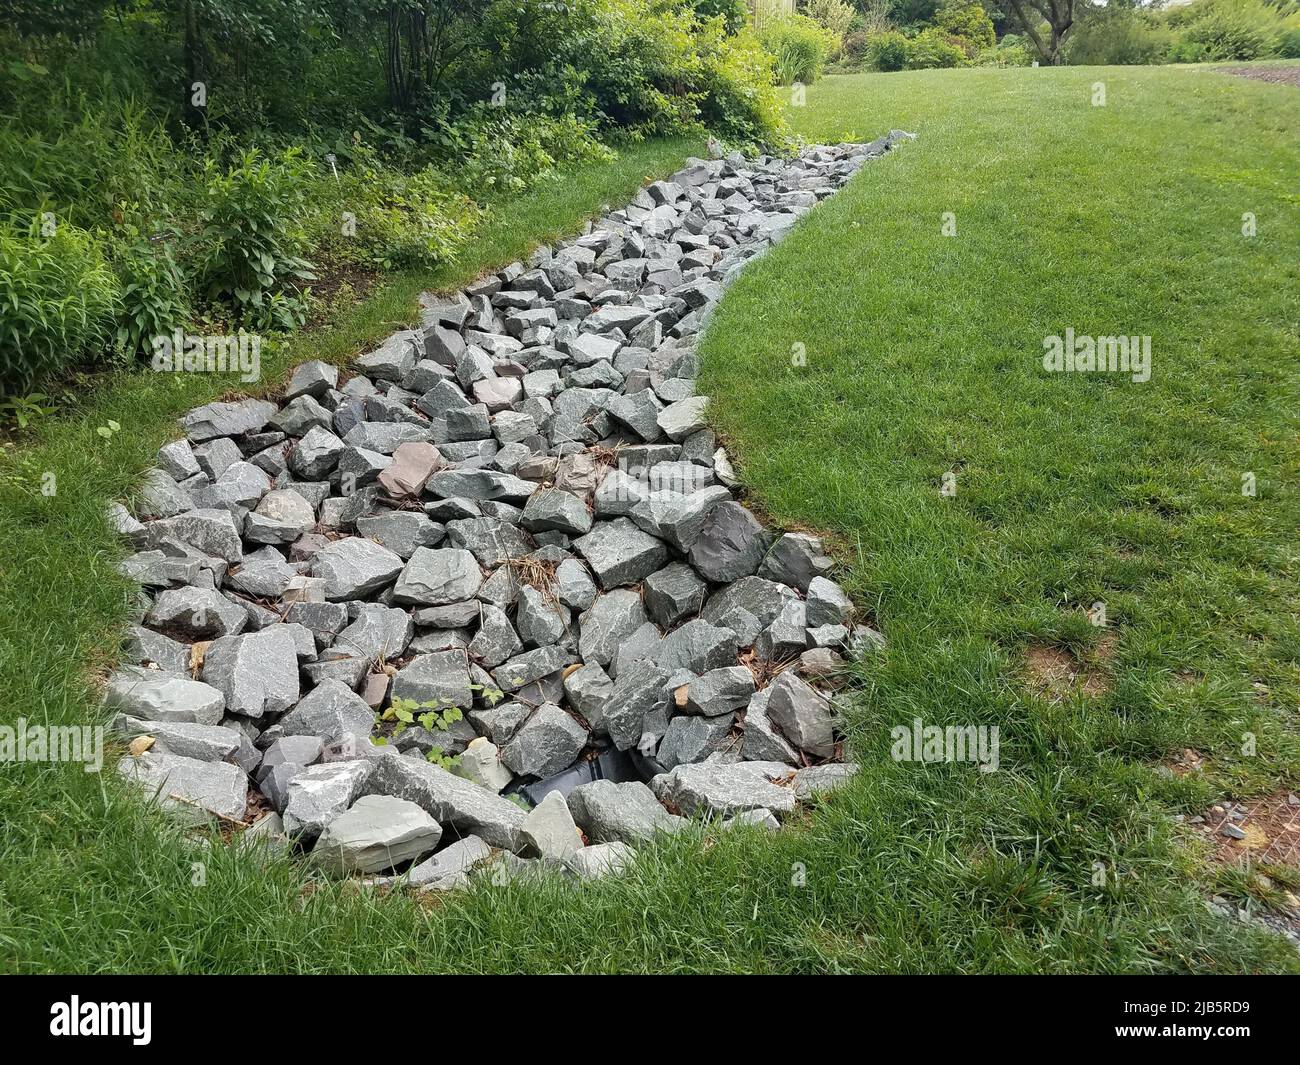 green grass lawn or yard with large grey rocks. Stock Photo